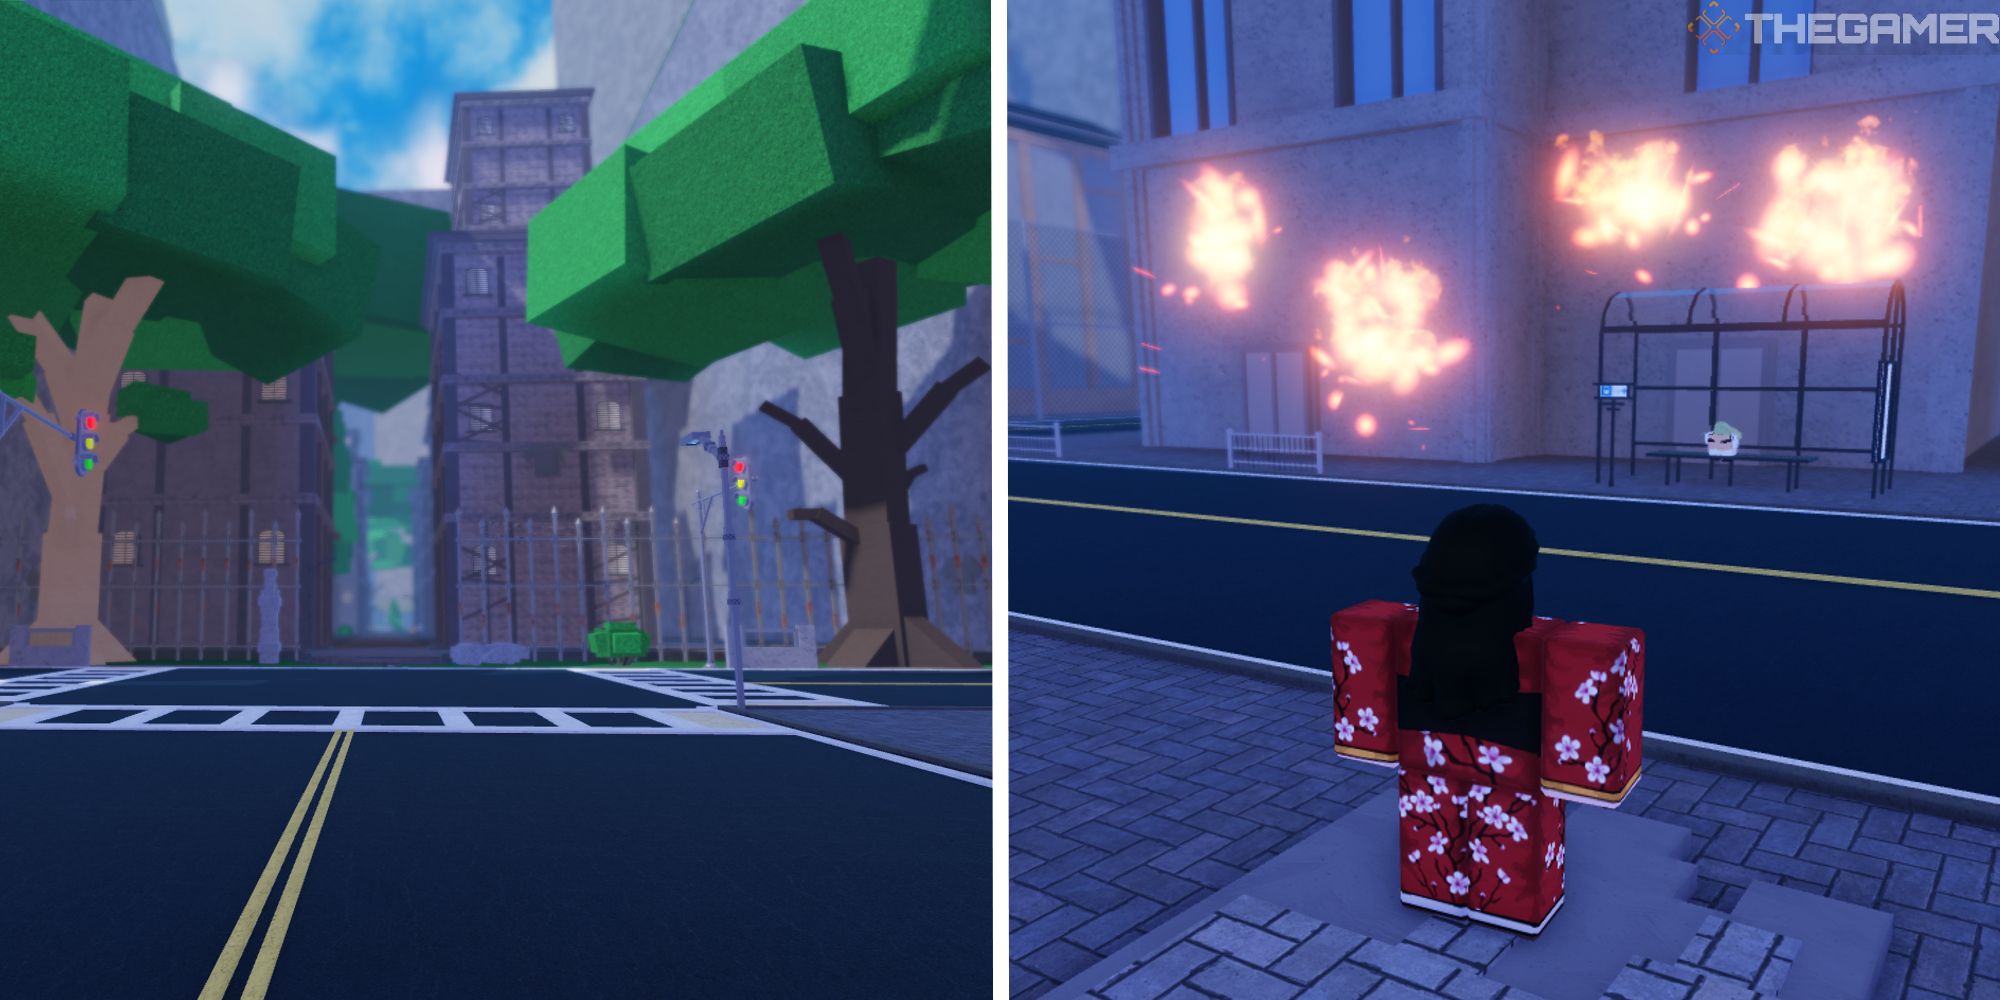 split image showing the slums next to image of player watching a building burn